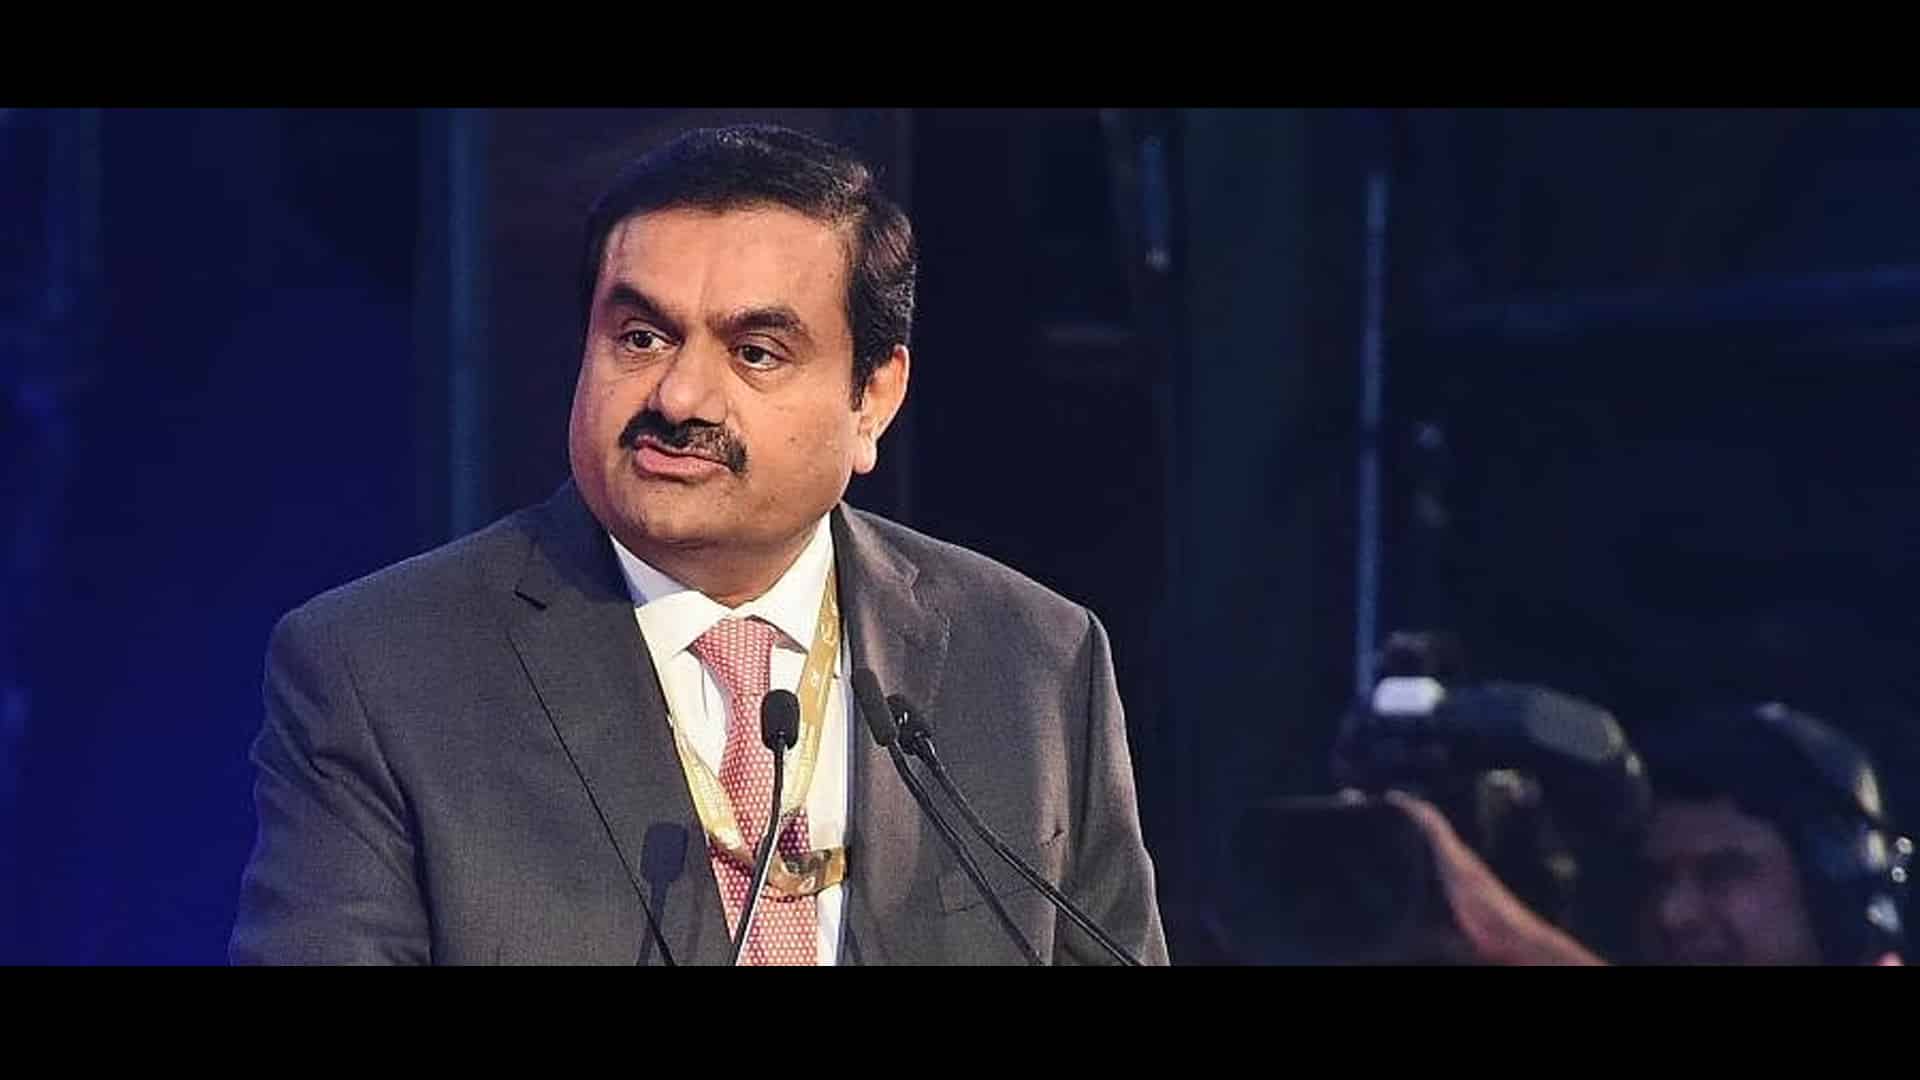 Hindenburg report combination of targeted misinformation, discredited allegations: Adani